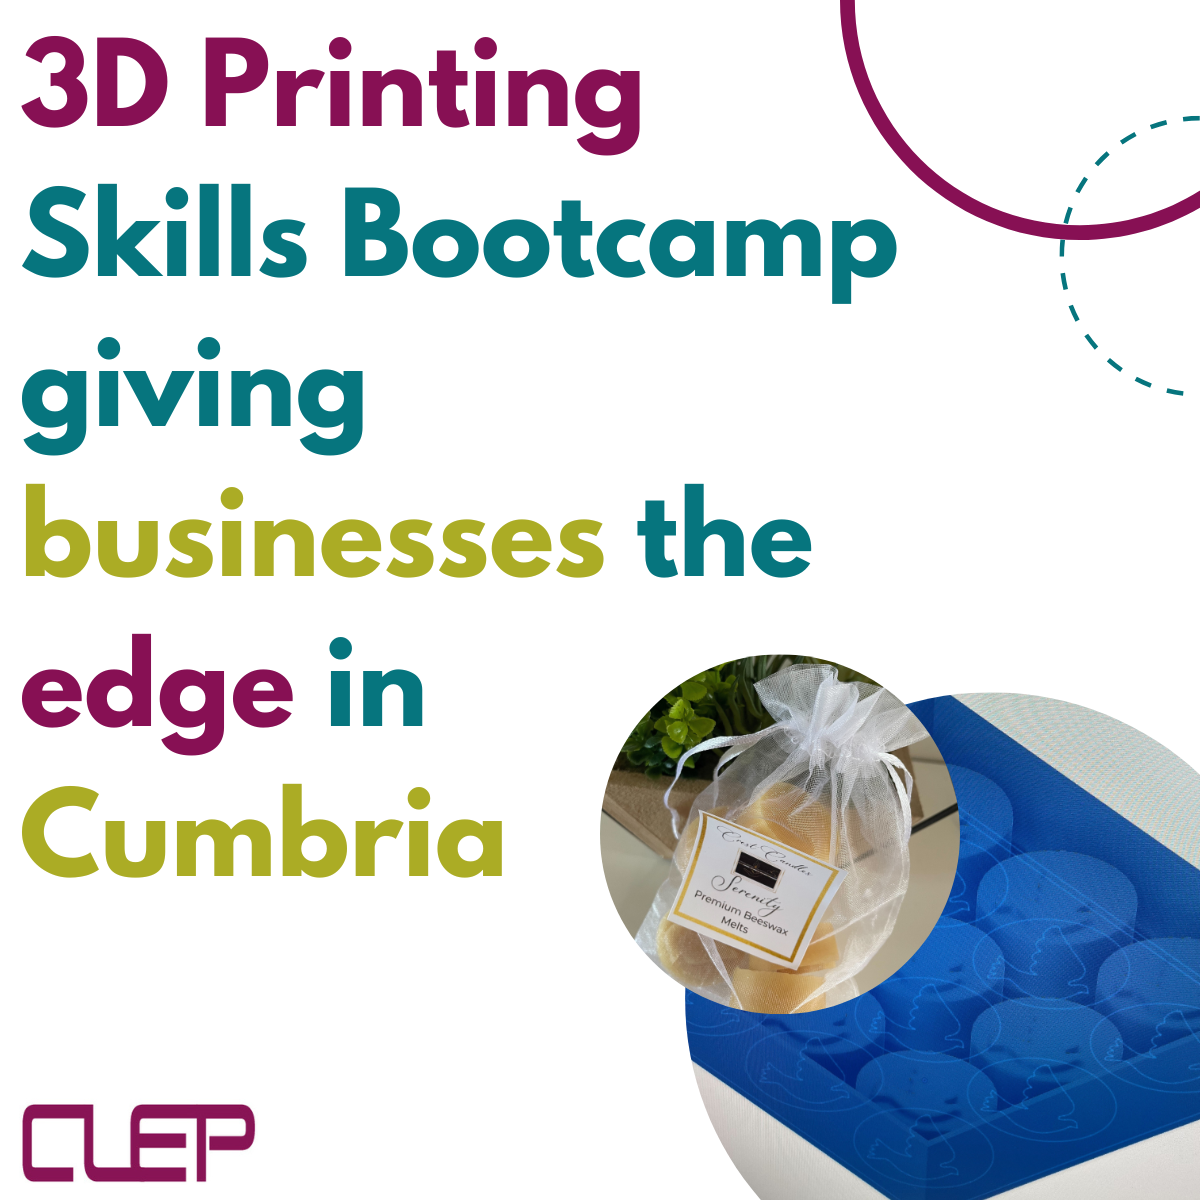 3D Printing Skills Bootcamp giving businesses the edge in Cumbria